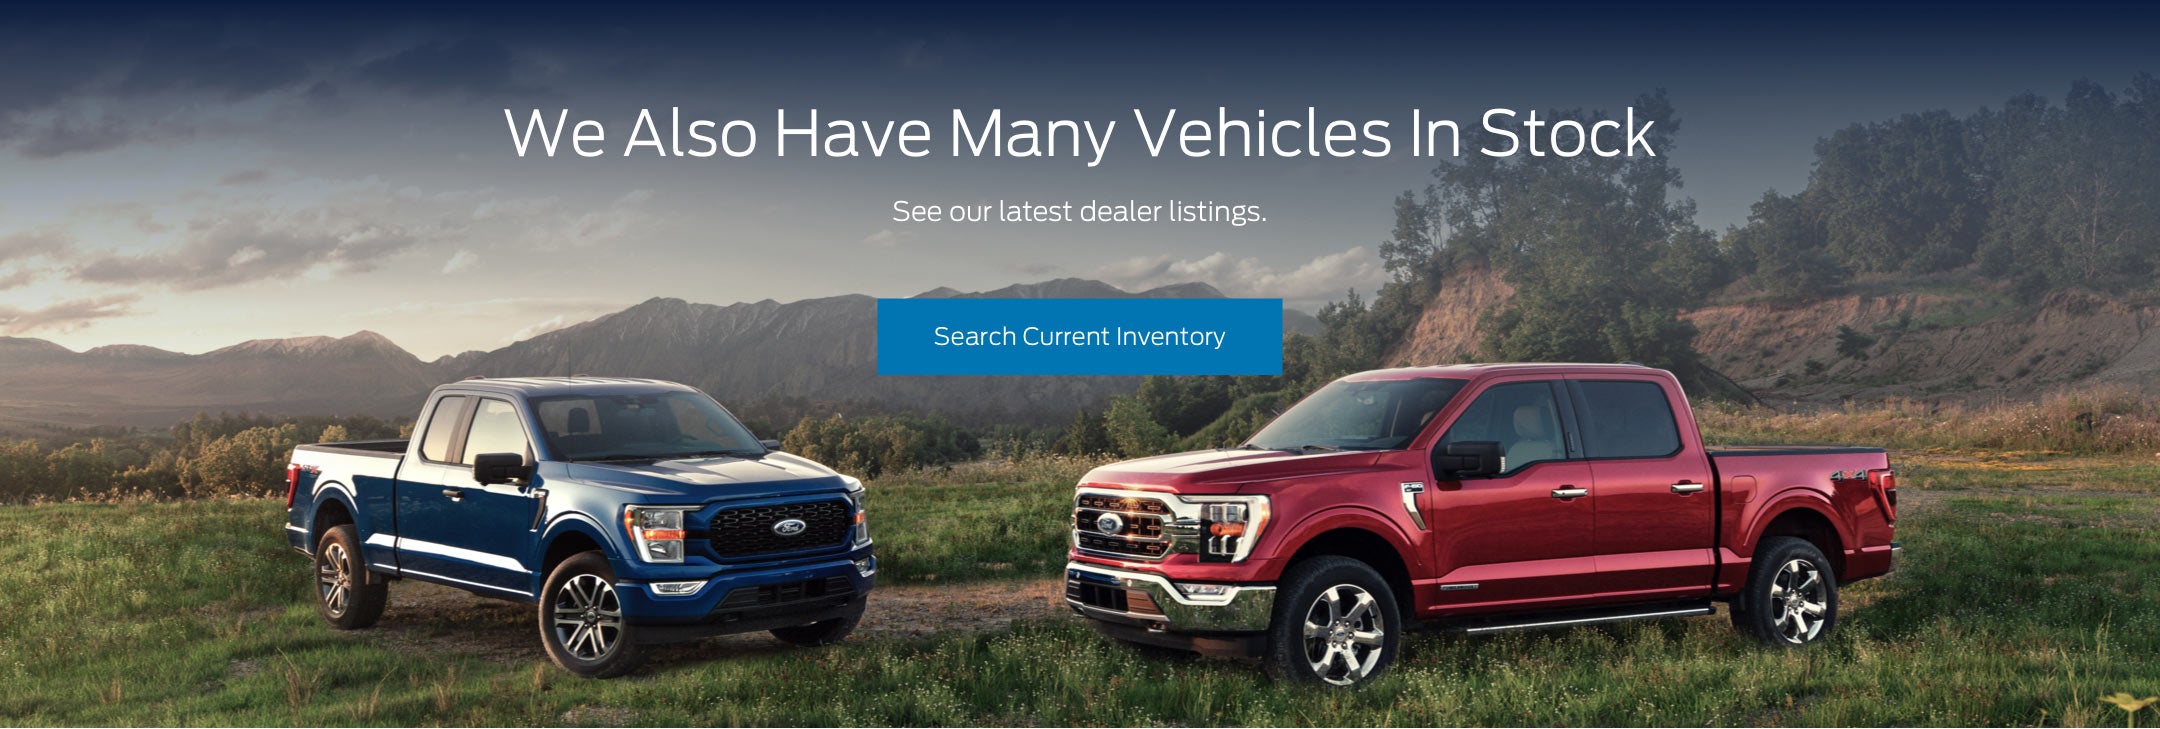 Ford vehicles in stock | Pat Milliken Ford in Redford MI